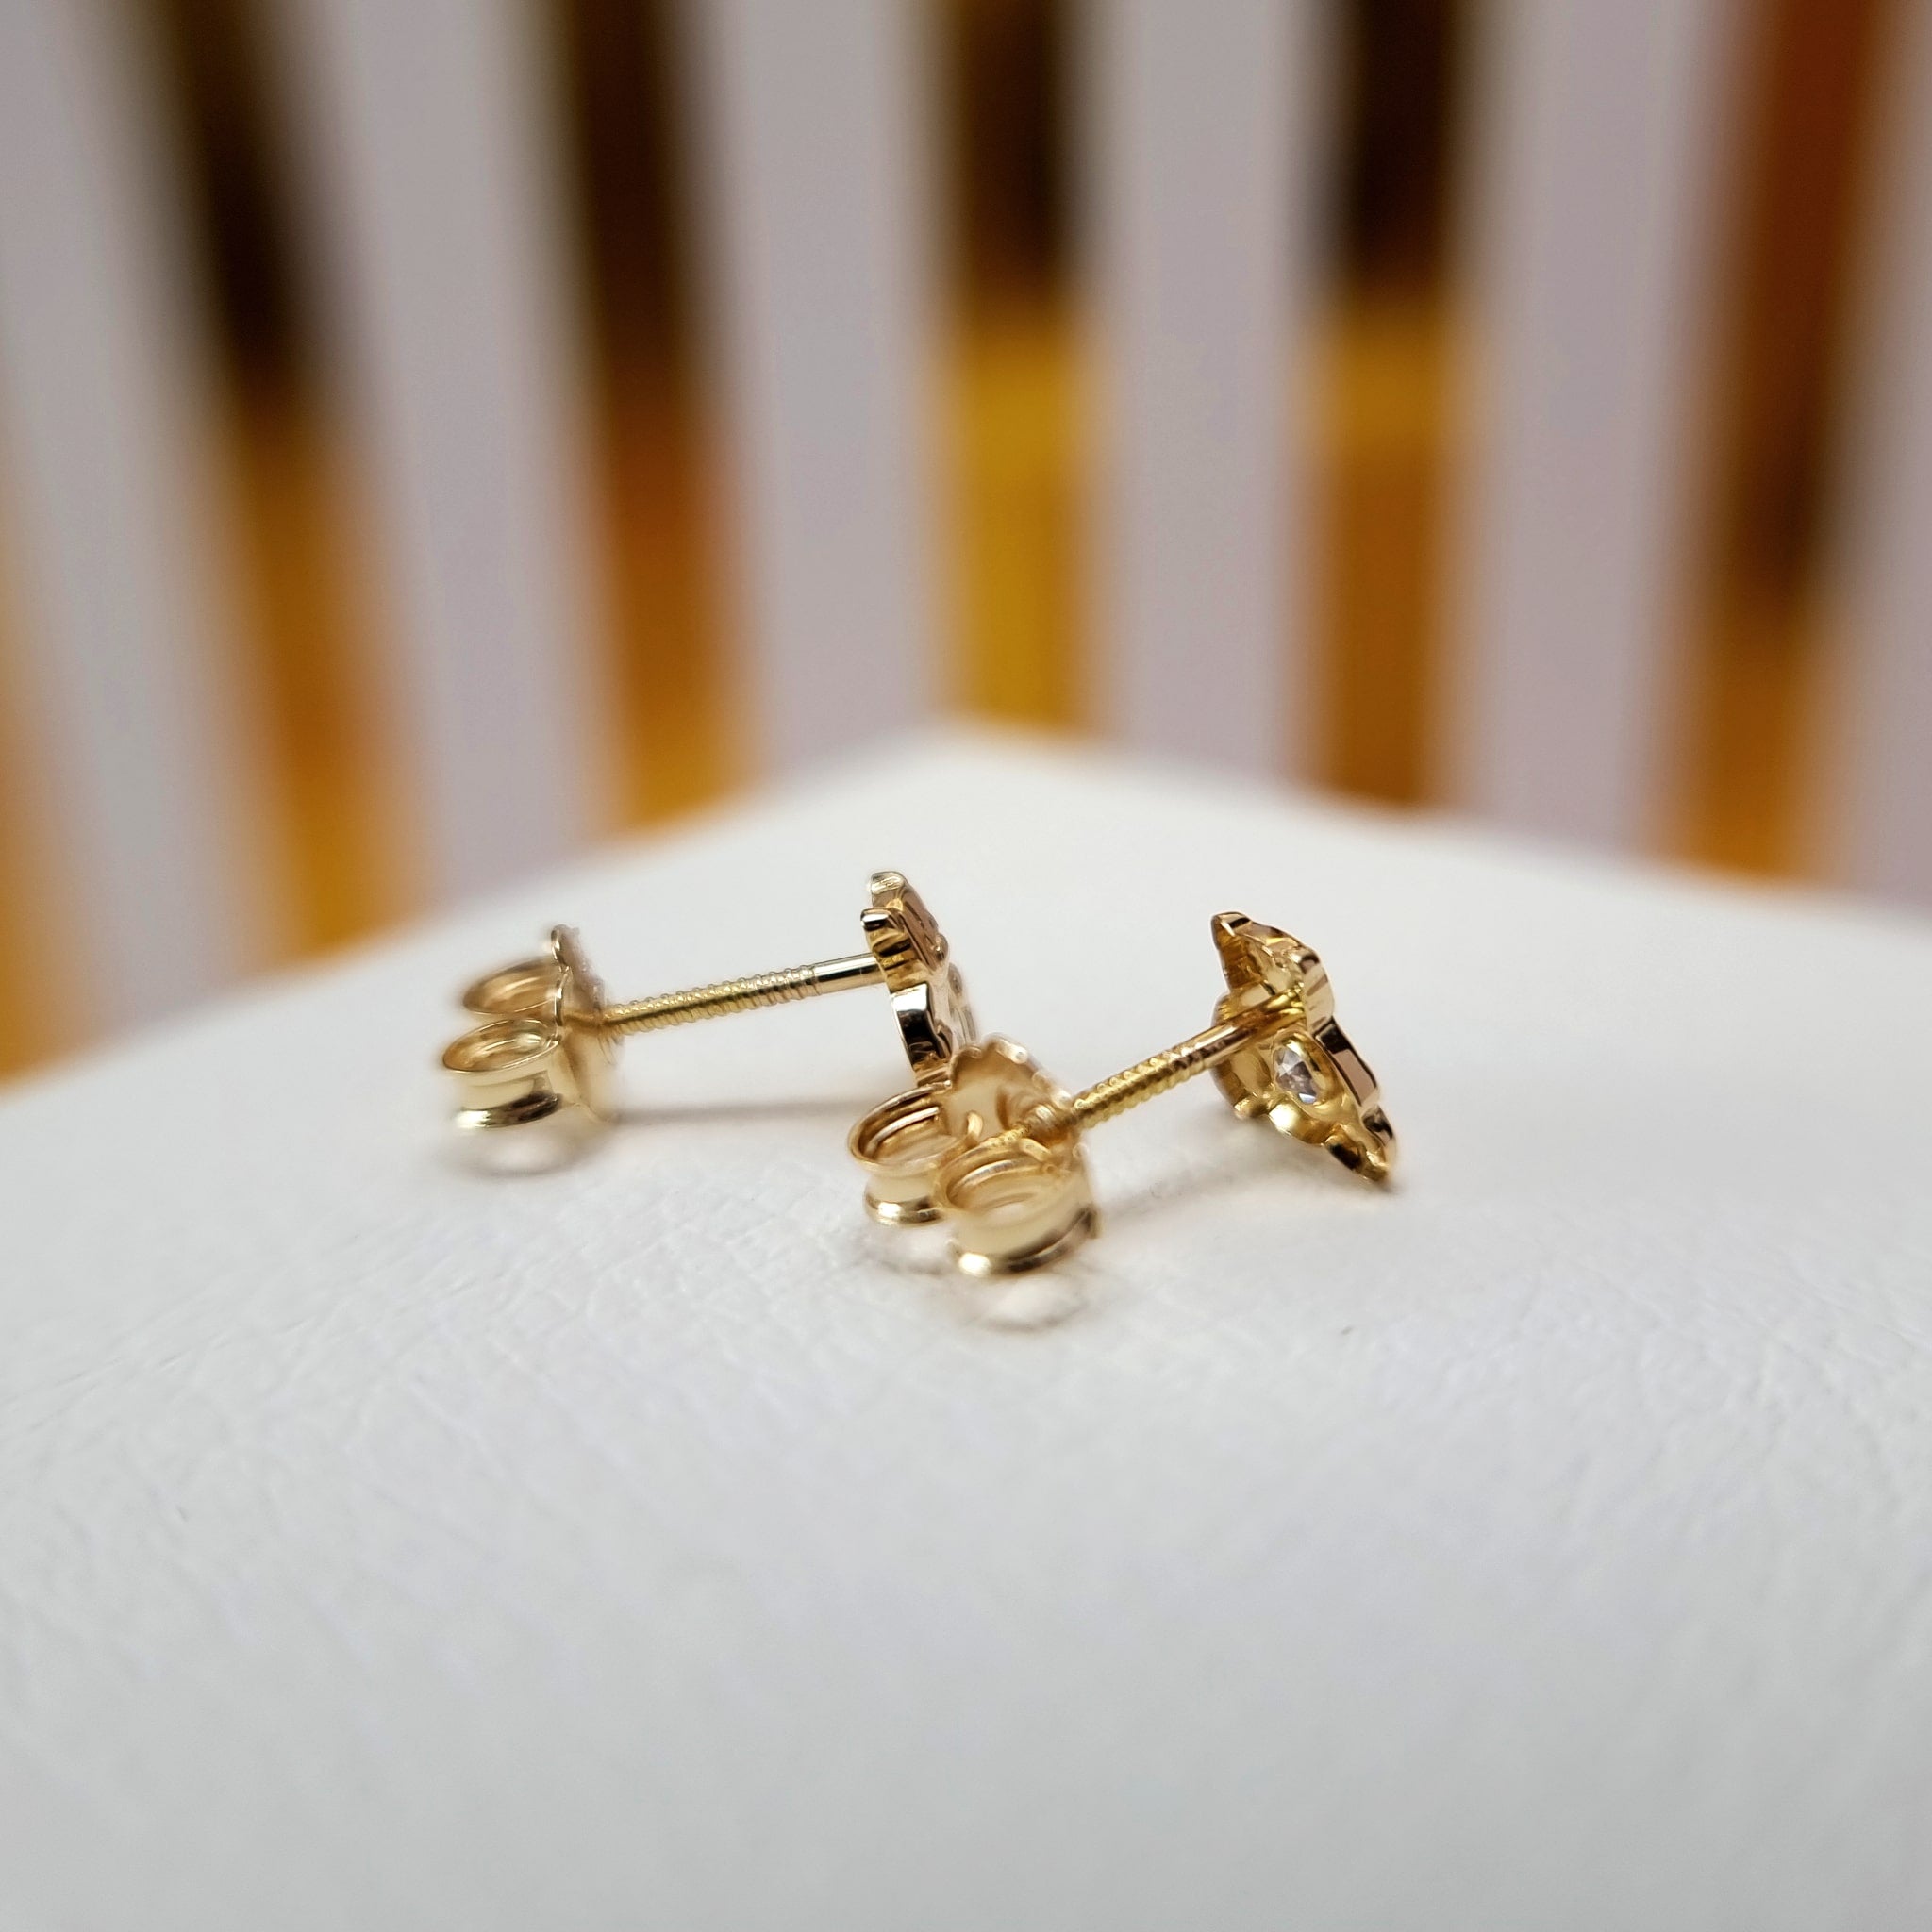 14K Yellow Gold Kid's Stud Earrings - Flower of Florian - Small. youme  offers a range of 14K gold jewelry for babies, kids, girls and women at  attractive prices. Free worldwide shipping.